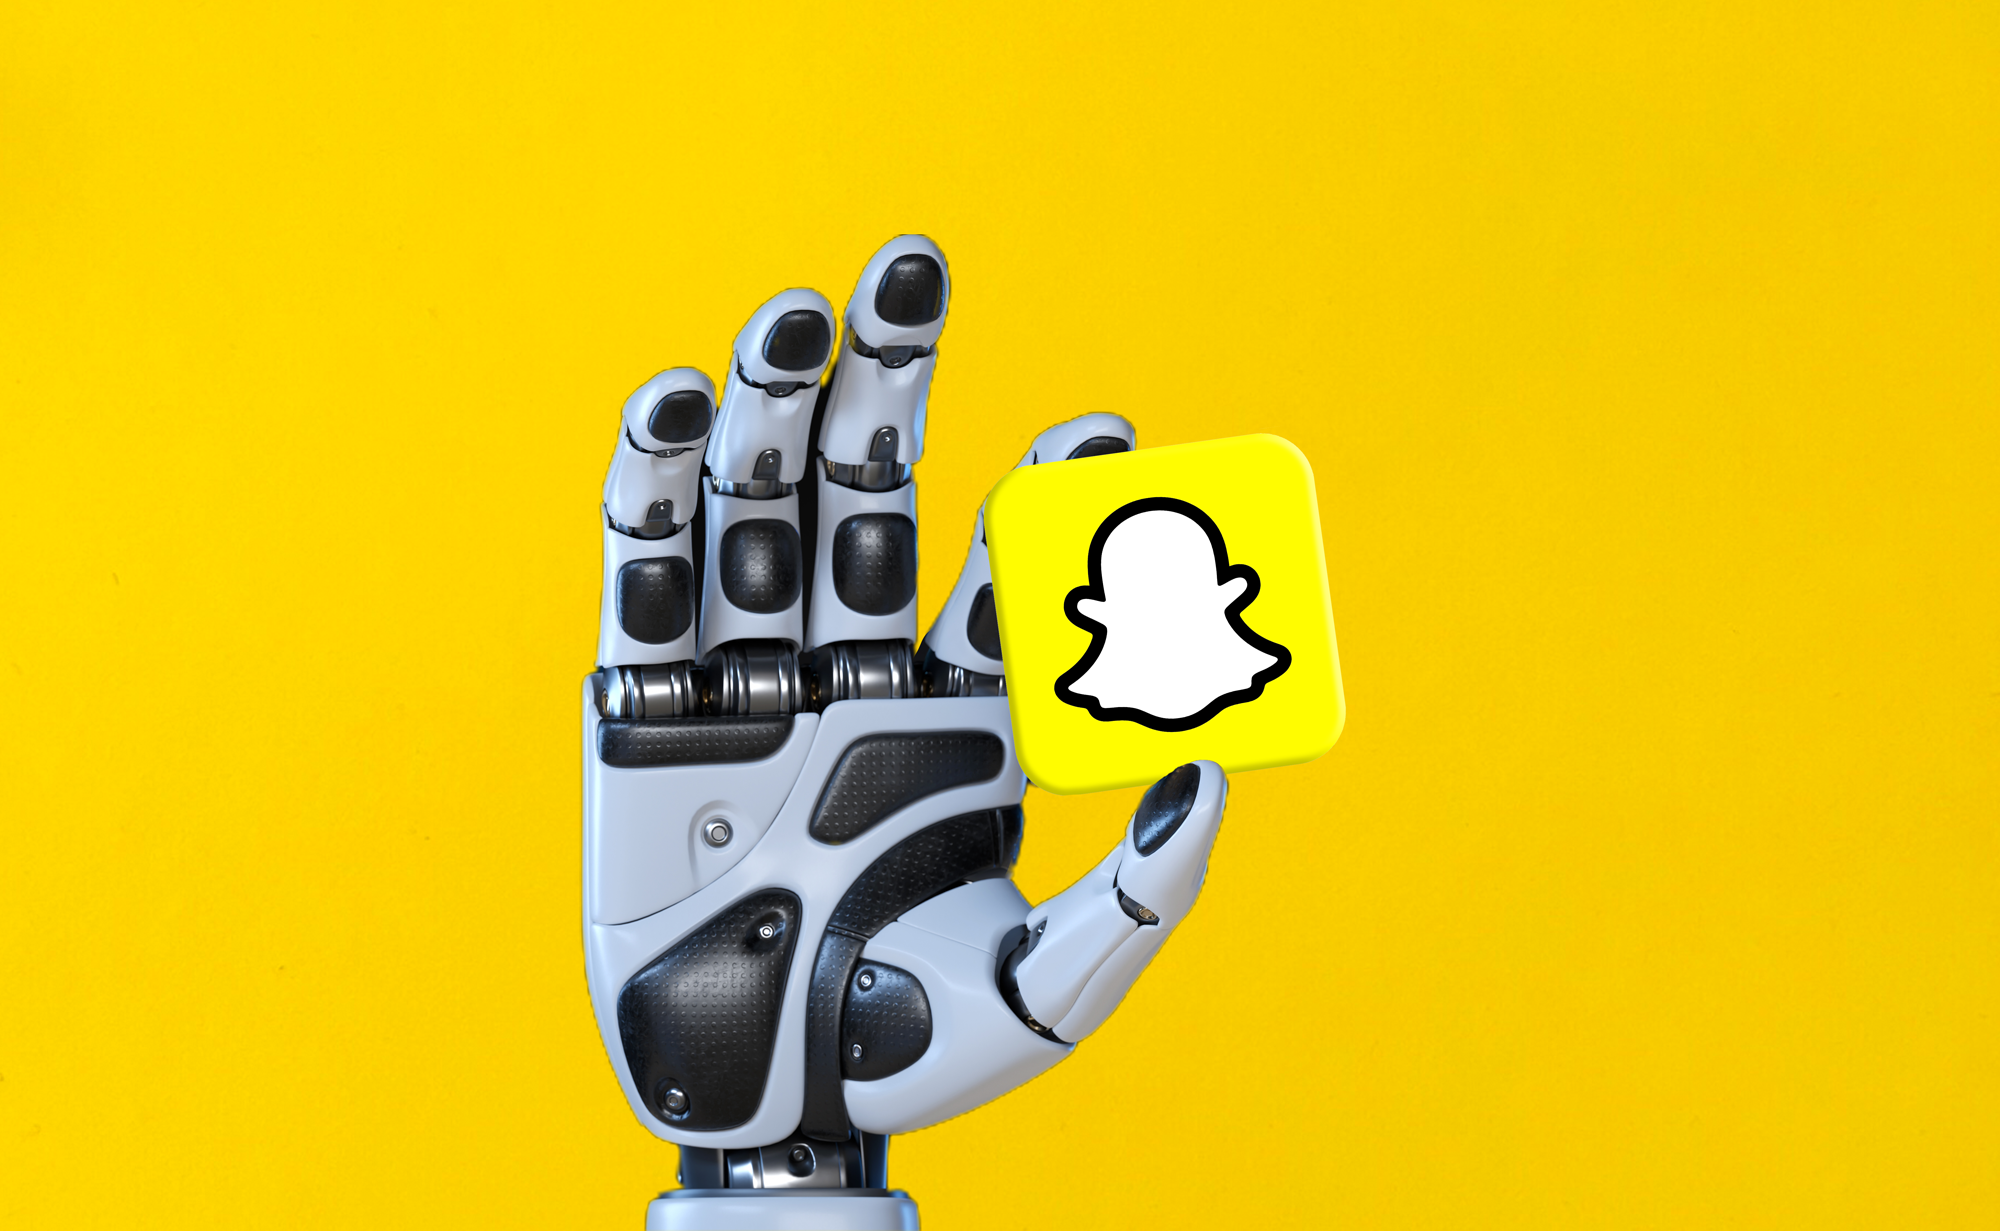 AI Everywhere: Meet Snapchat’s ‘My AI’ Chatbot, Your New Virtual Best Friend